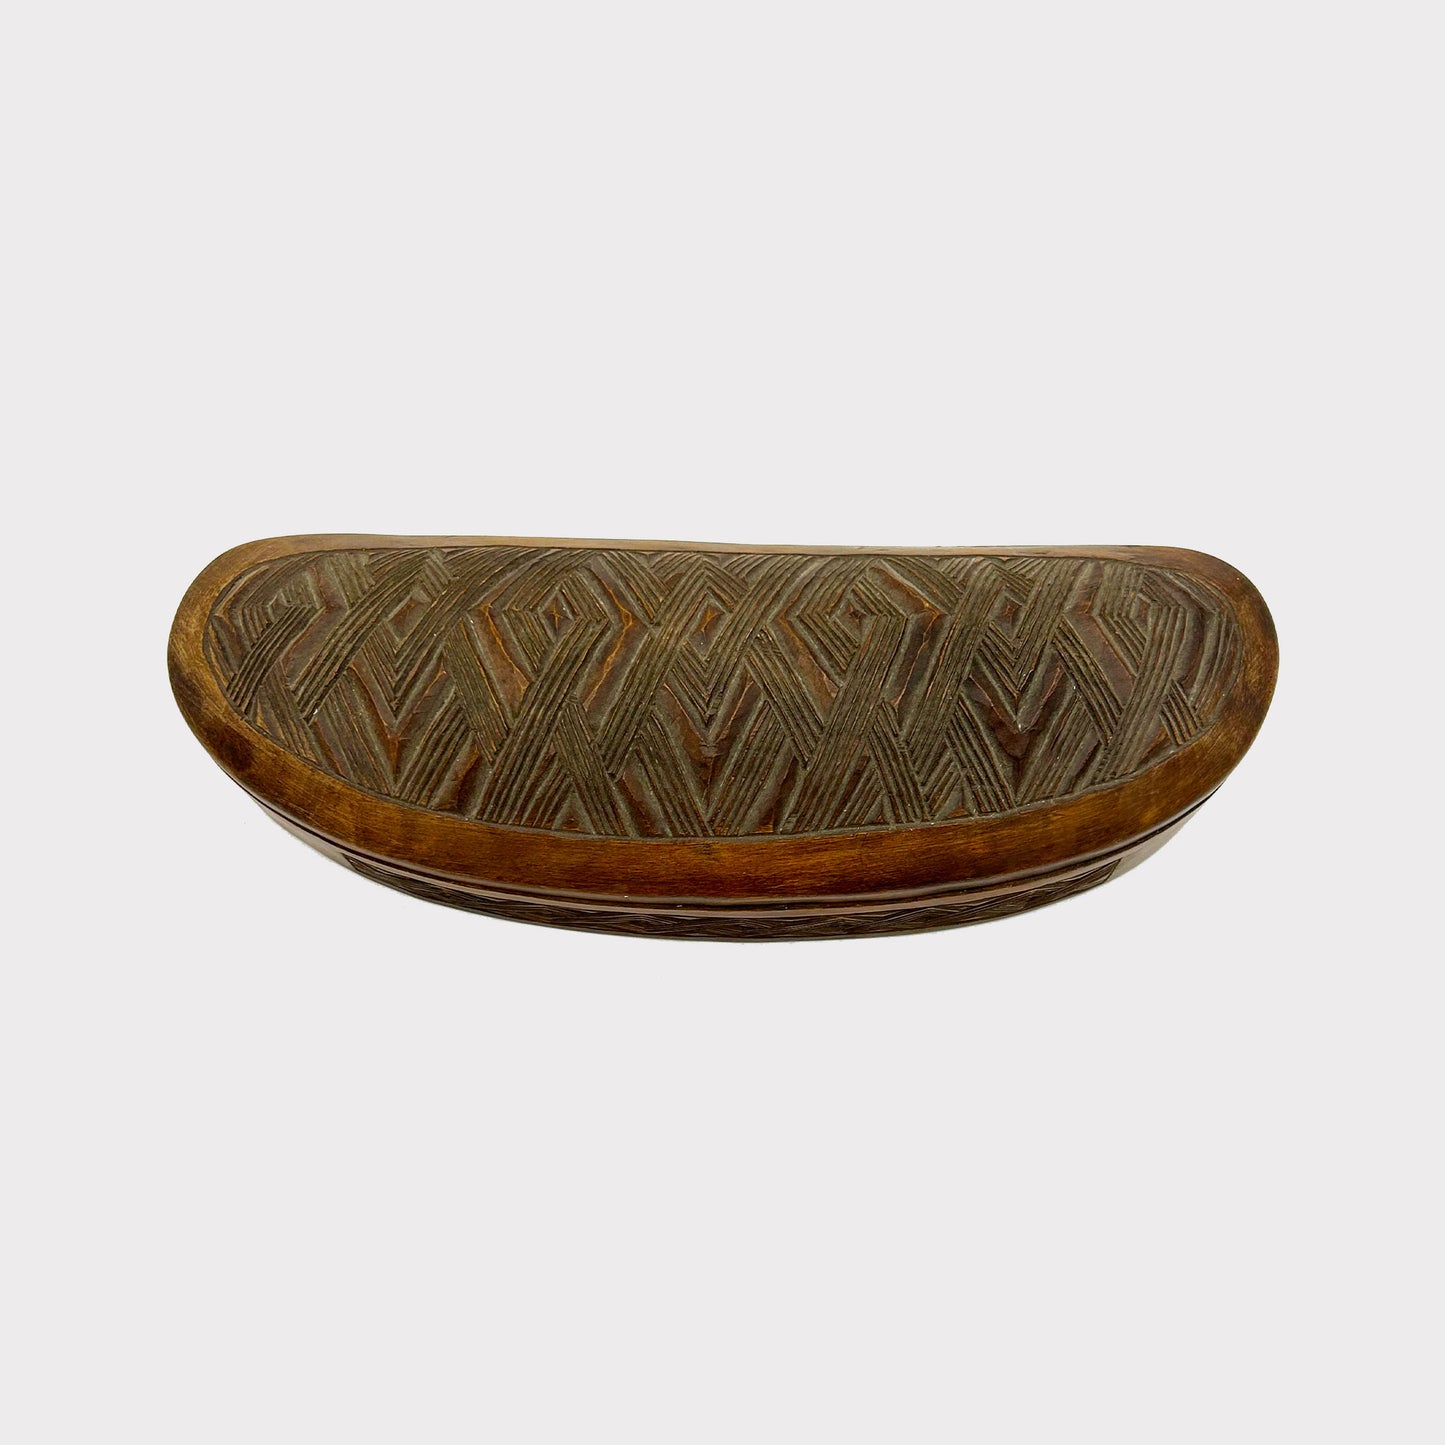 Vintage Carved Container with African design